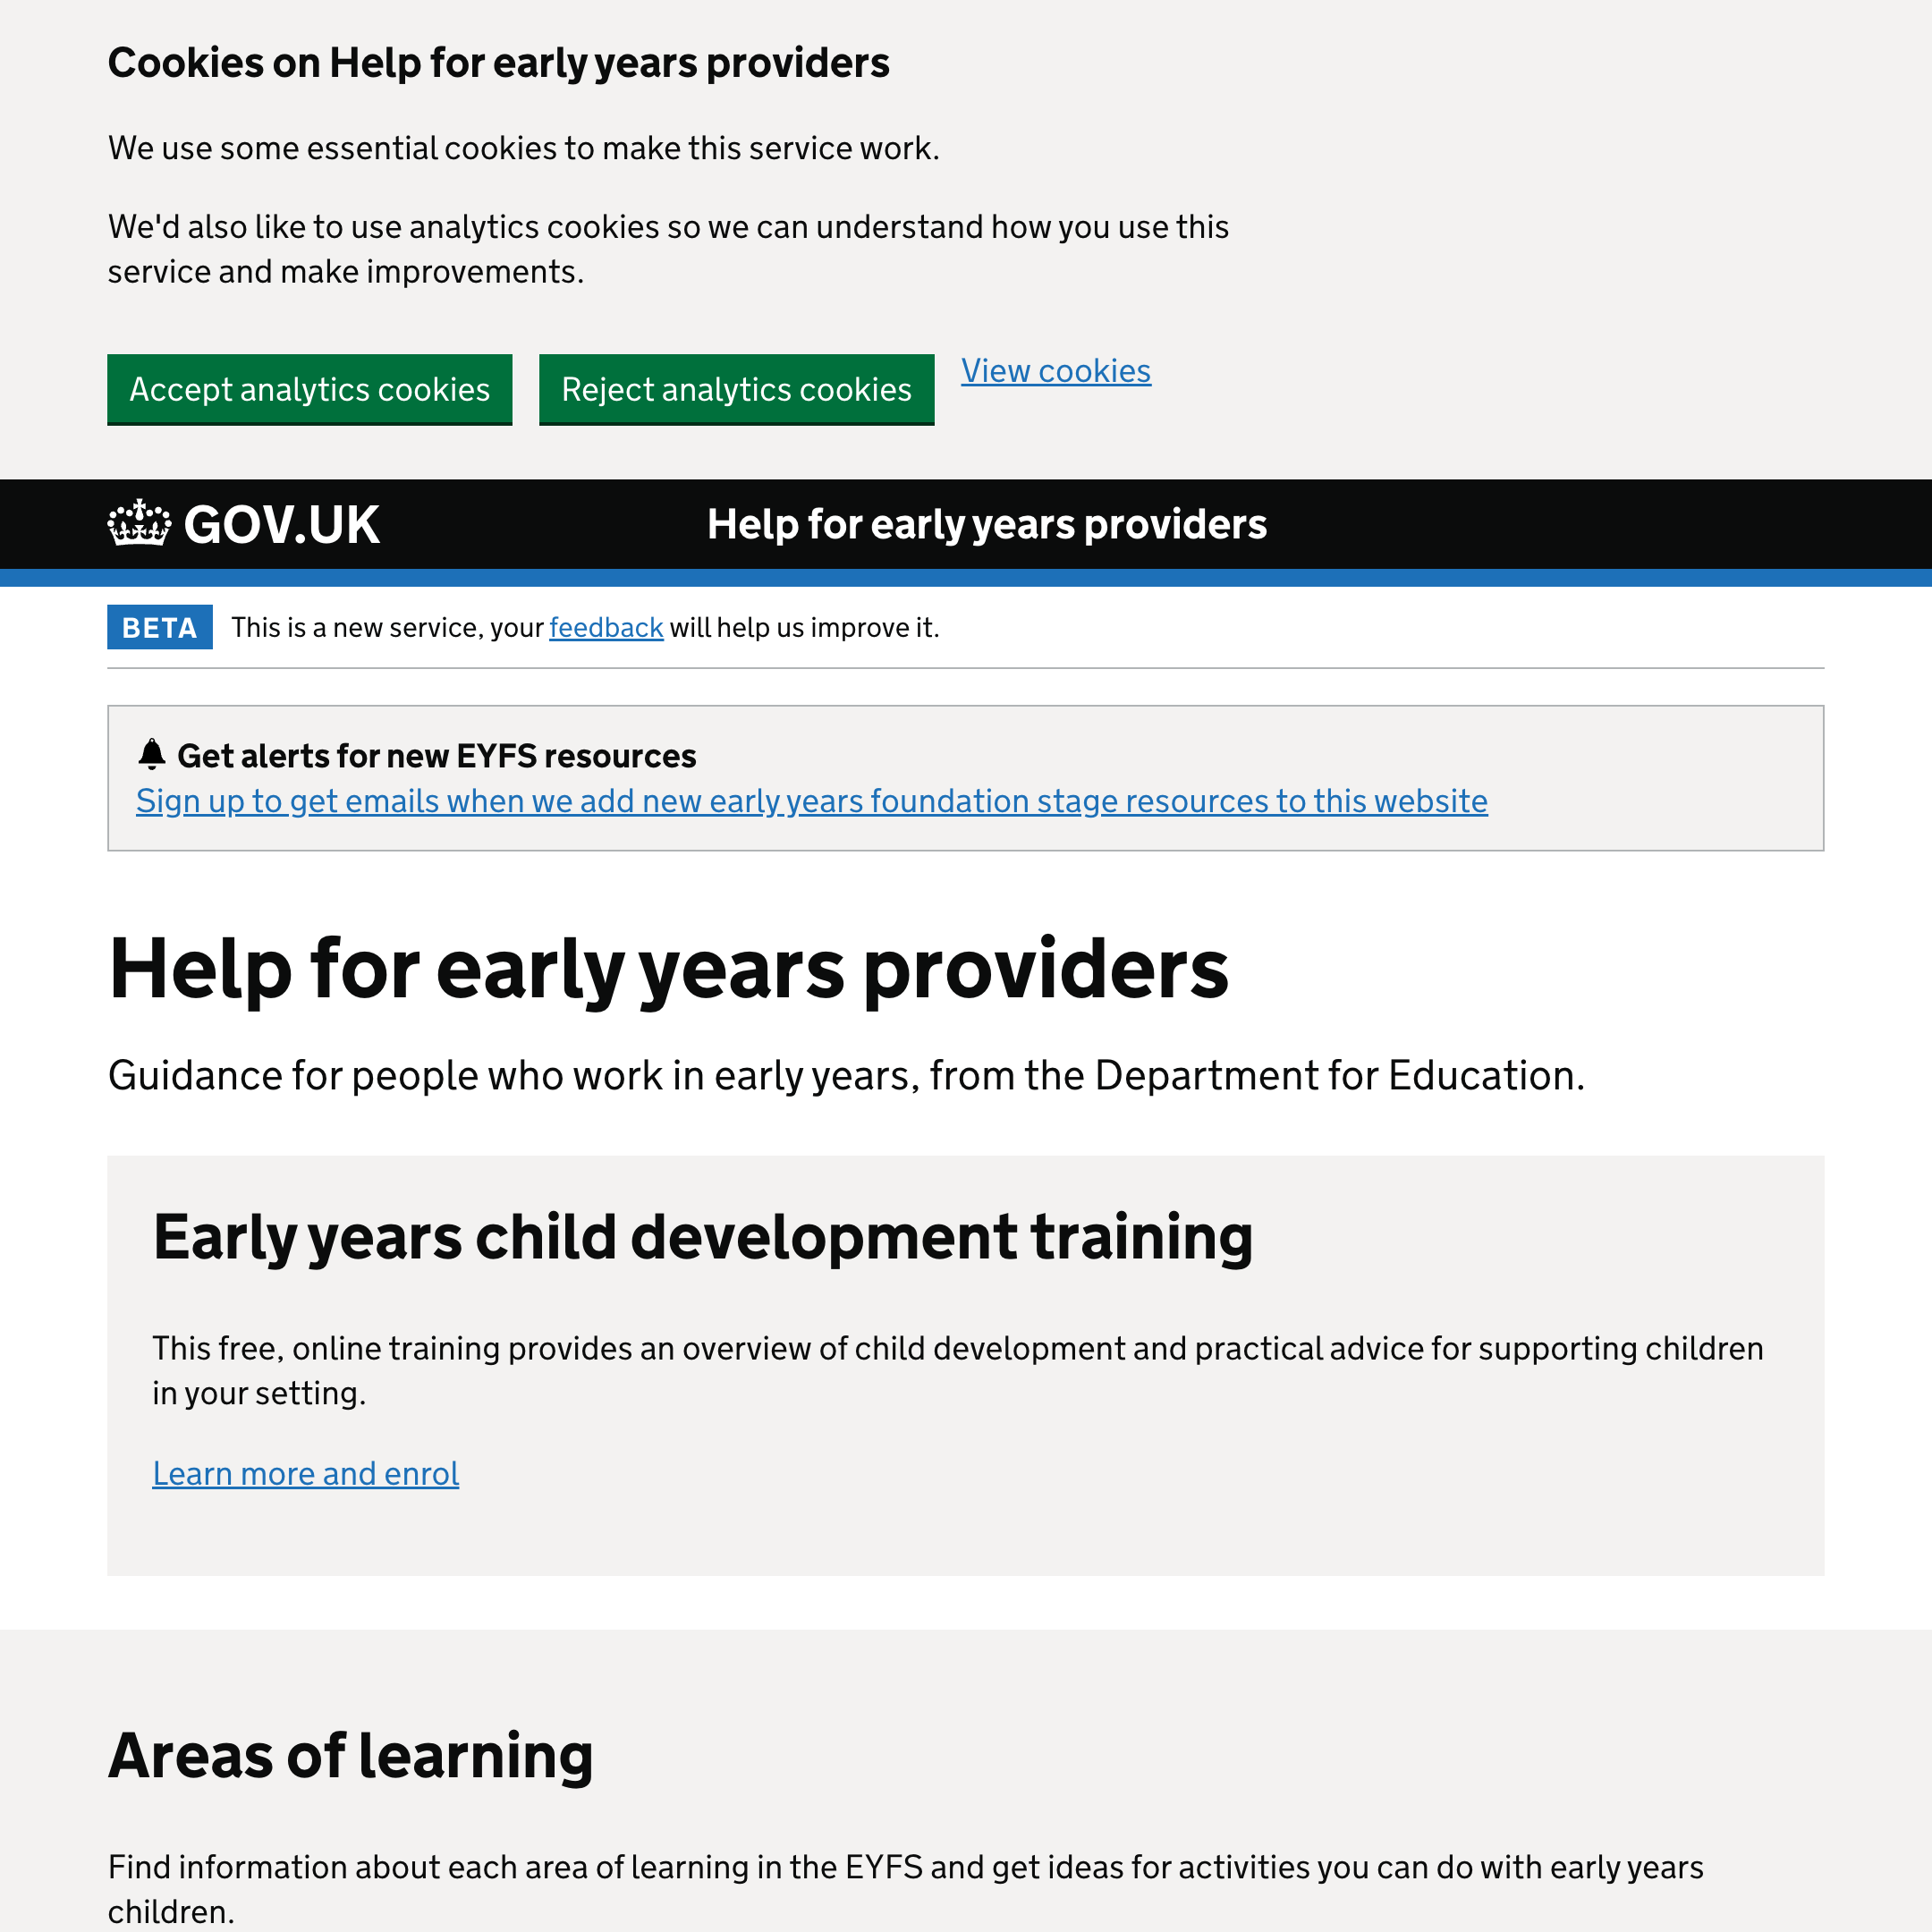 Help for early years providers